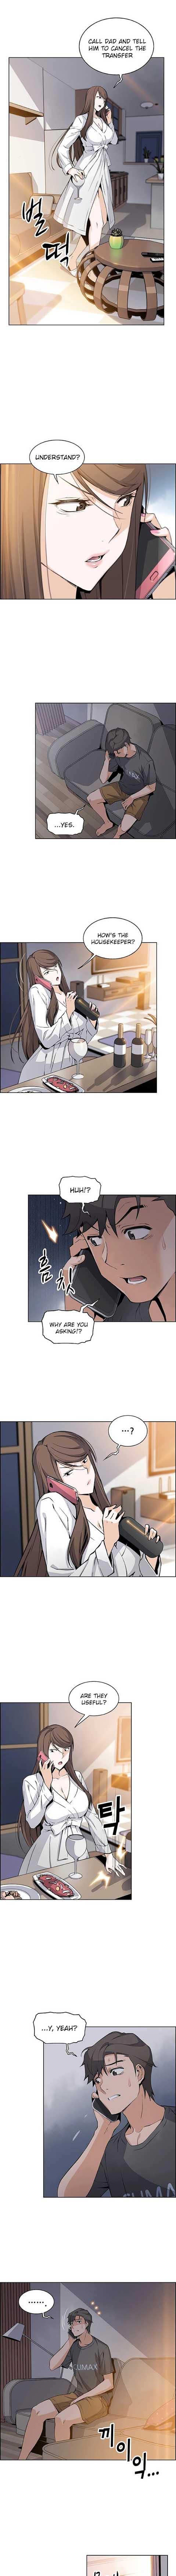 Housekeeper [Neck Pillow, Paper] Ch.49/49 [English] [Manhwa PDF] Completed 260